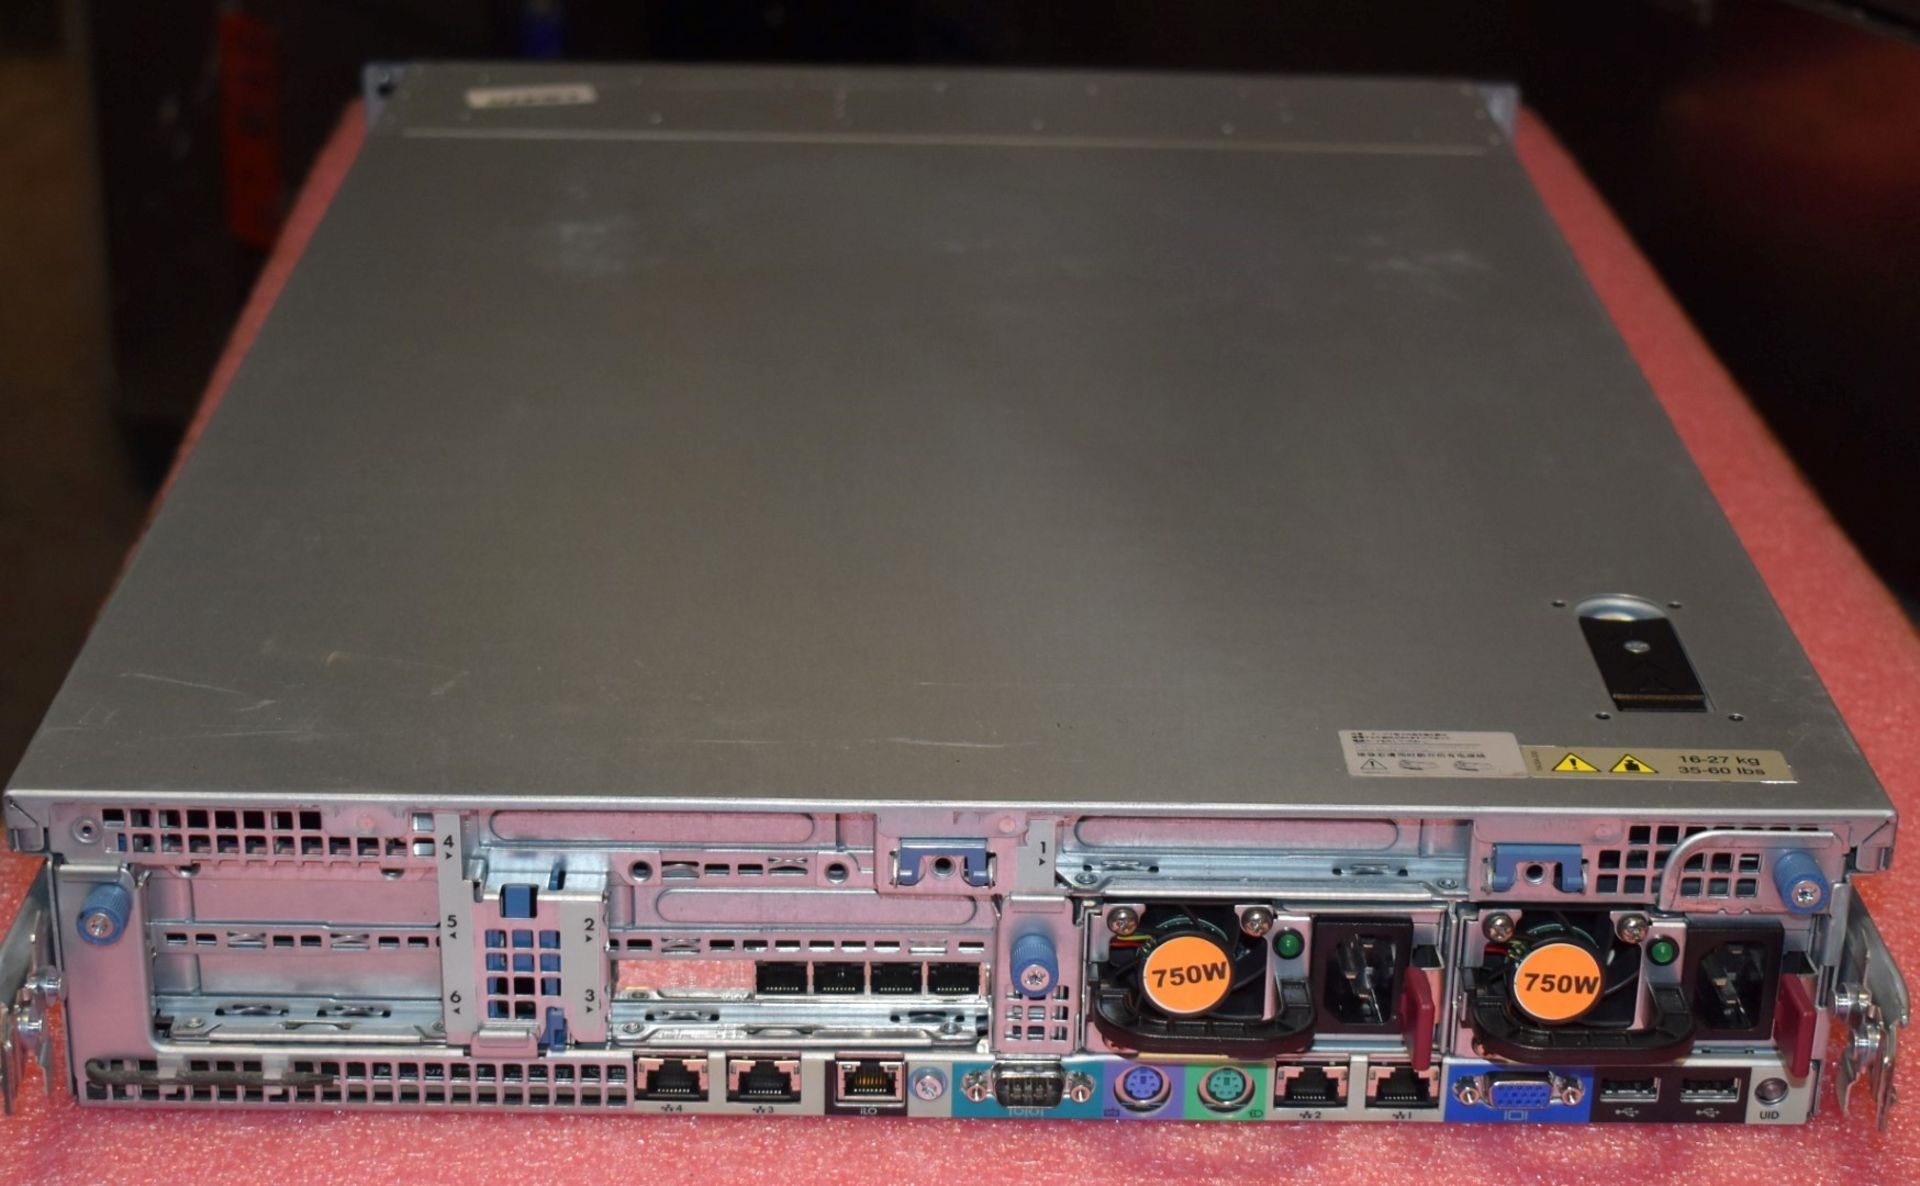 1 x HP ProLiant DL380 G7 Server With 2 x Intel Xeon X5650 Six Core 3.06ghz Processors and 84gb Ram - - Image 2 of 7